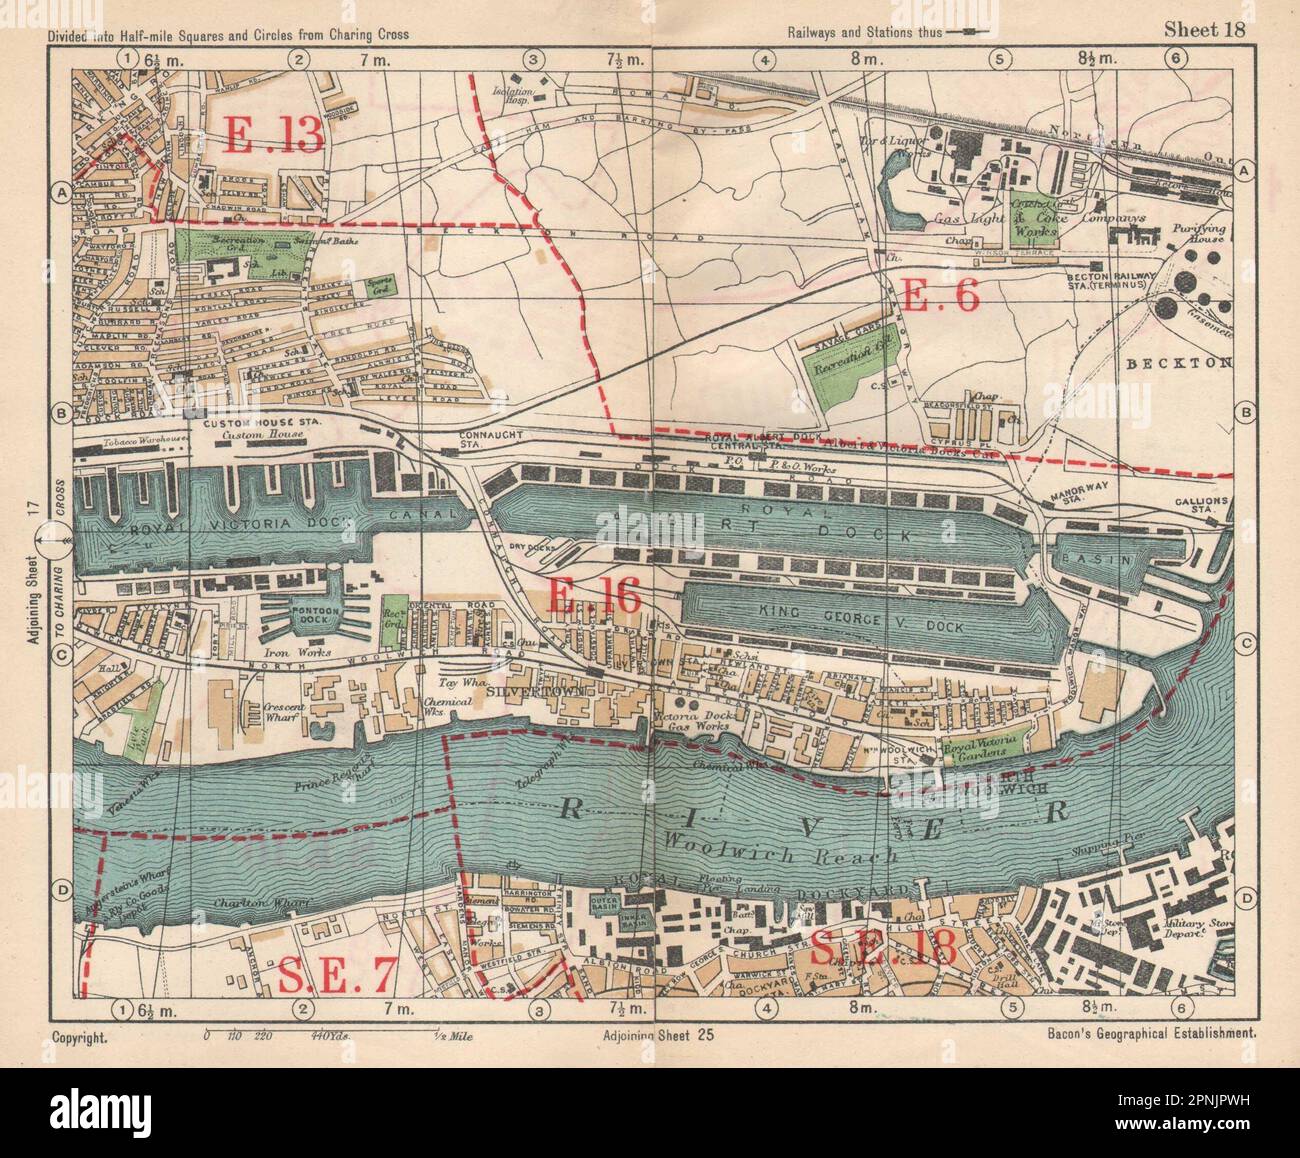 E LONDON Royal Victoria/Albert Docks Beckton Woolwich Silvertown.BACON 1925 map Banque D'Images